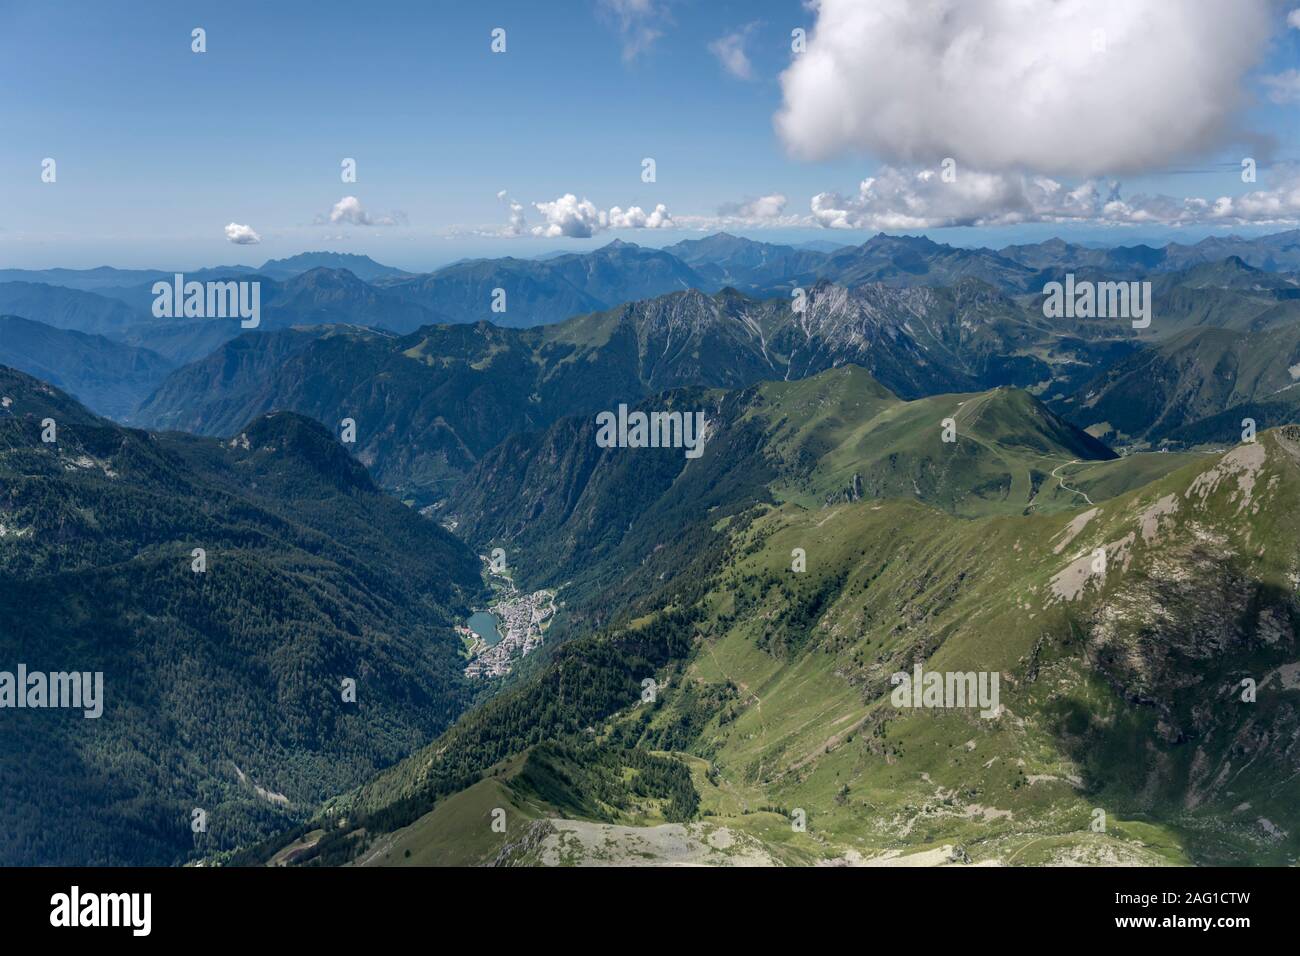 aerial, from a small plane, of Carona valley and village in Orobie mountains, shot in bright summer light, near Carona, Lombardy , Italy Stock Photo